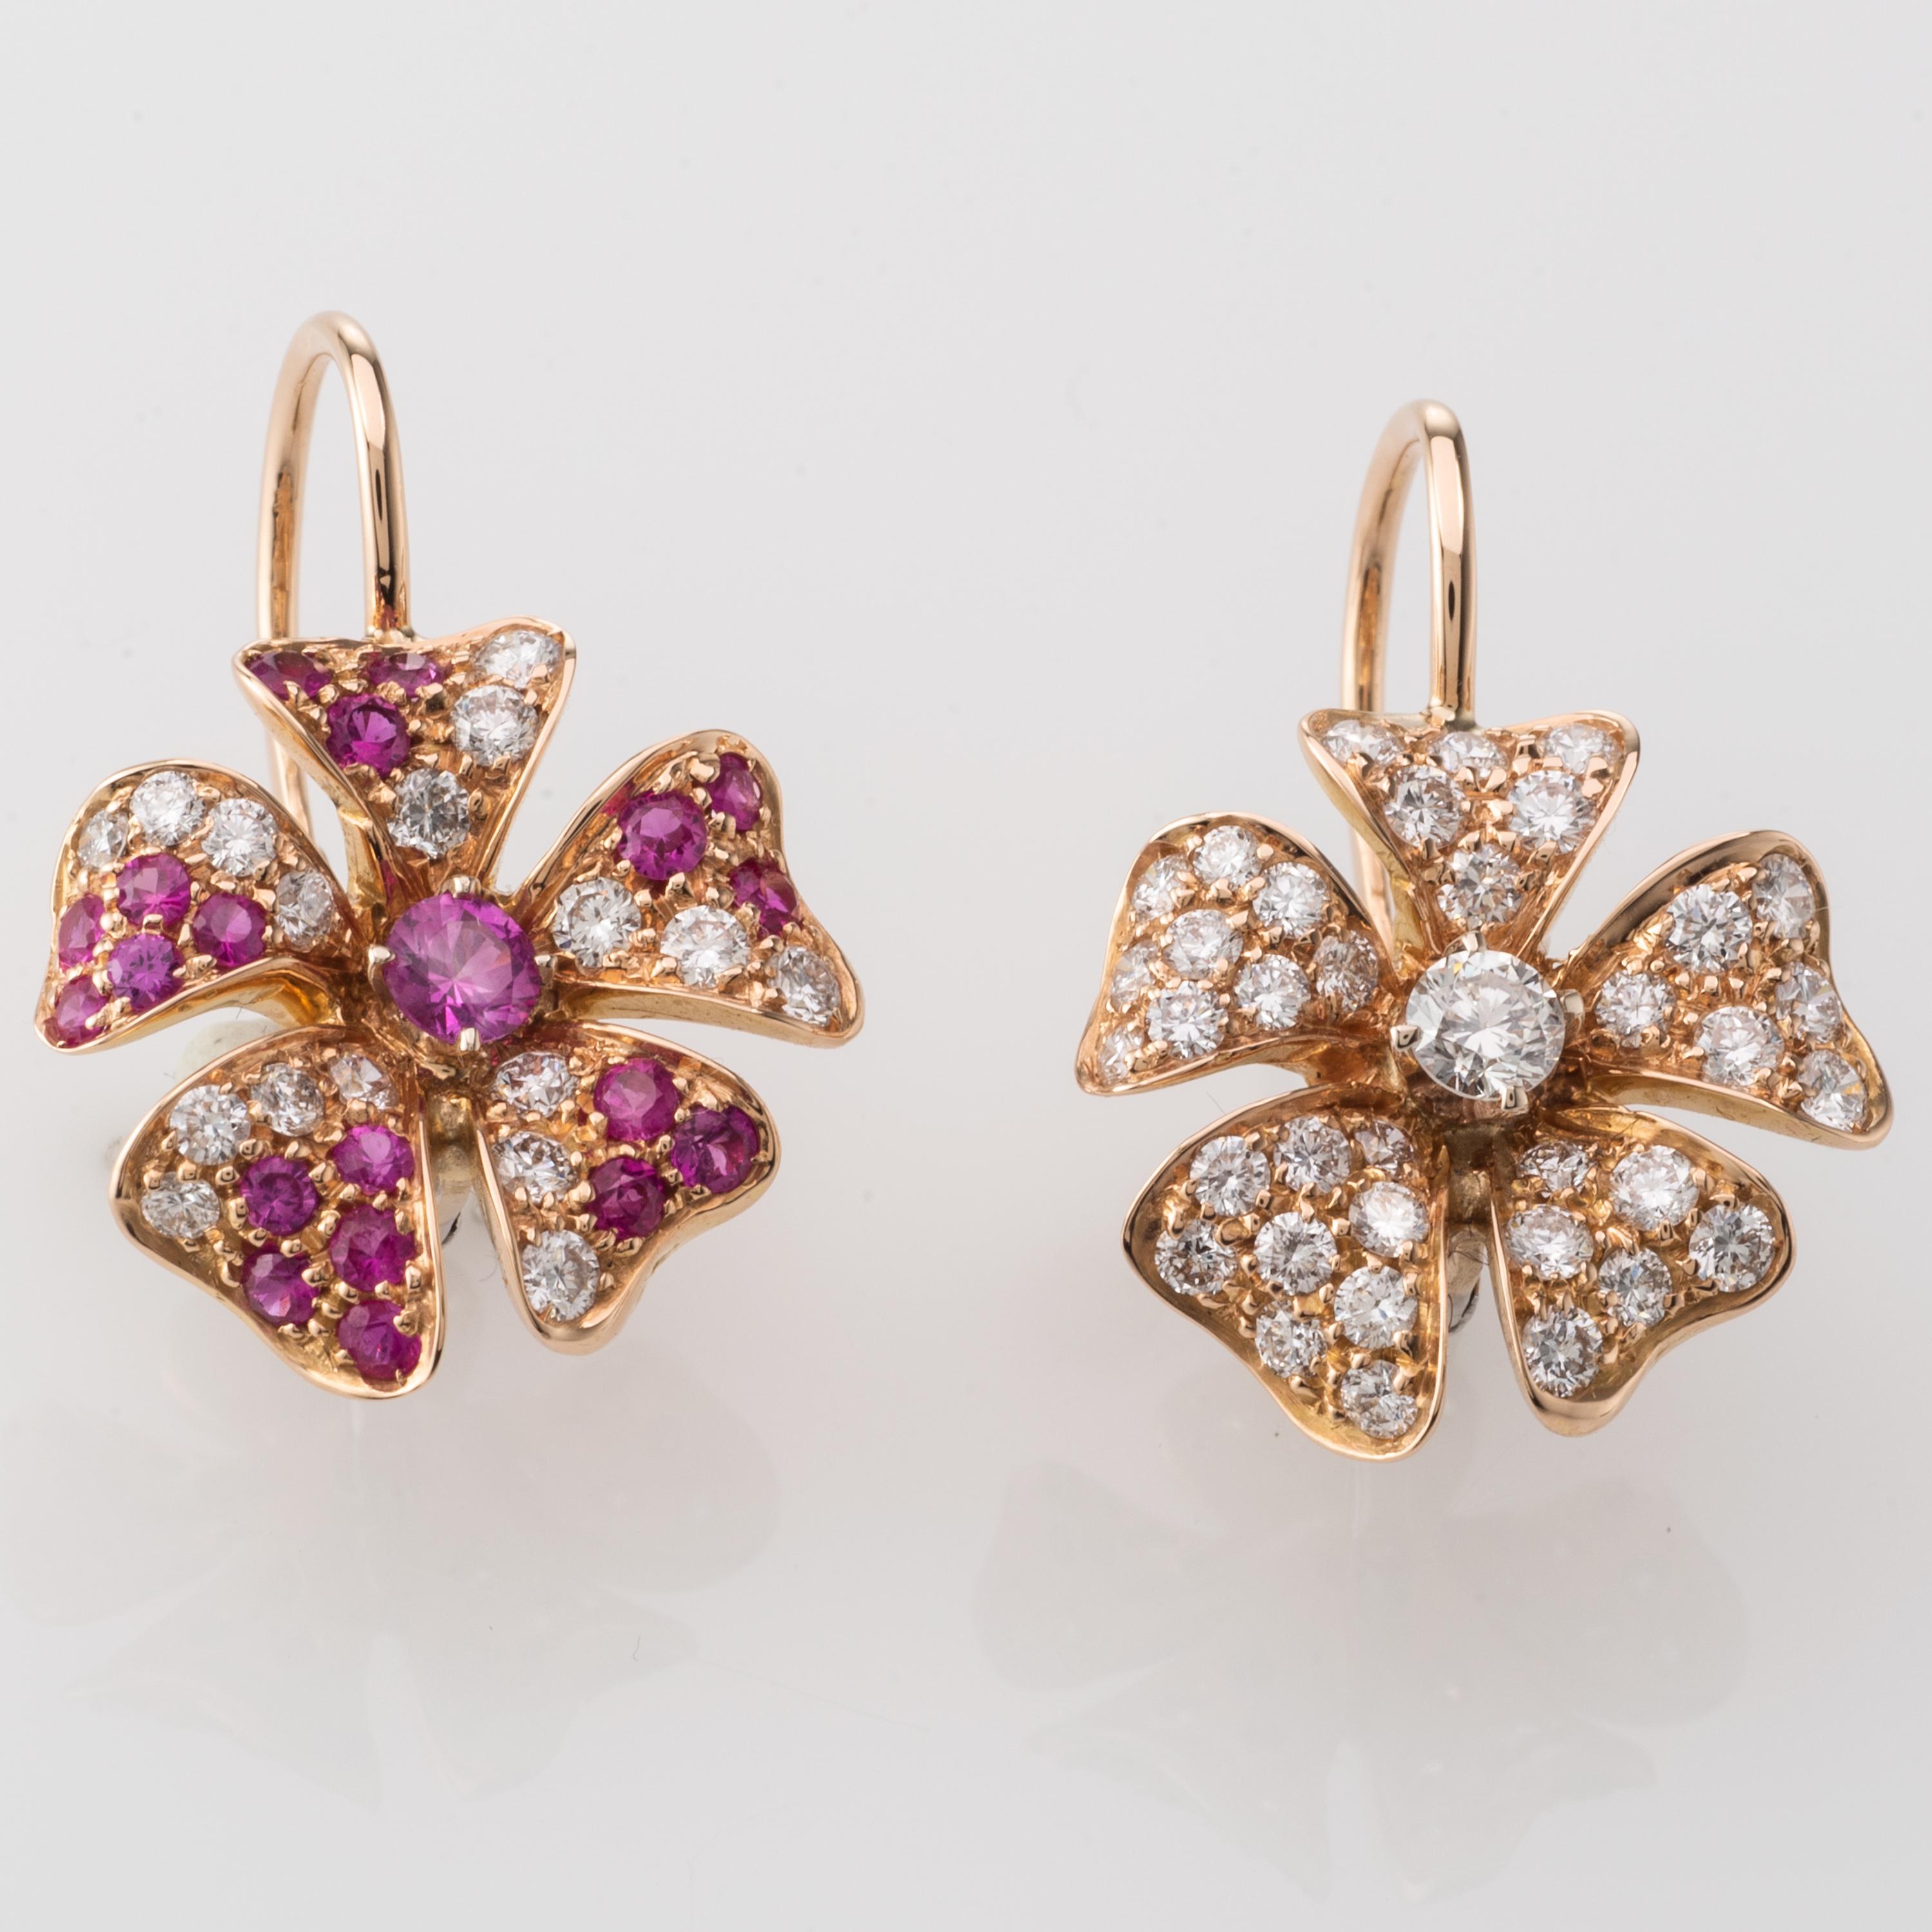 Fashion style Earrings set with Pink Sapphire and Diamonds.
0.89 Carat Diamond and 1.01 Carat of Pink Sapphire set in 18 Karat Rose Gold.
Customisation of gold colour, stones is possible. We can custom make this item according to your taste. When